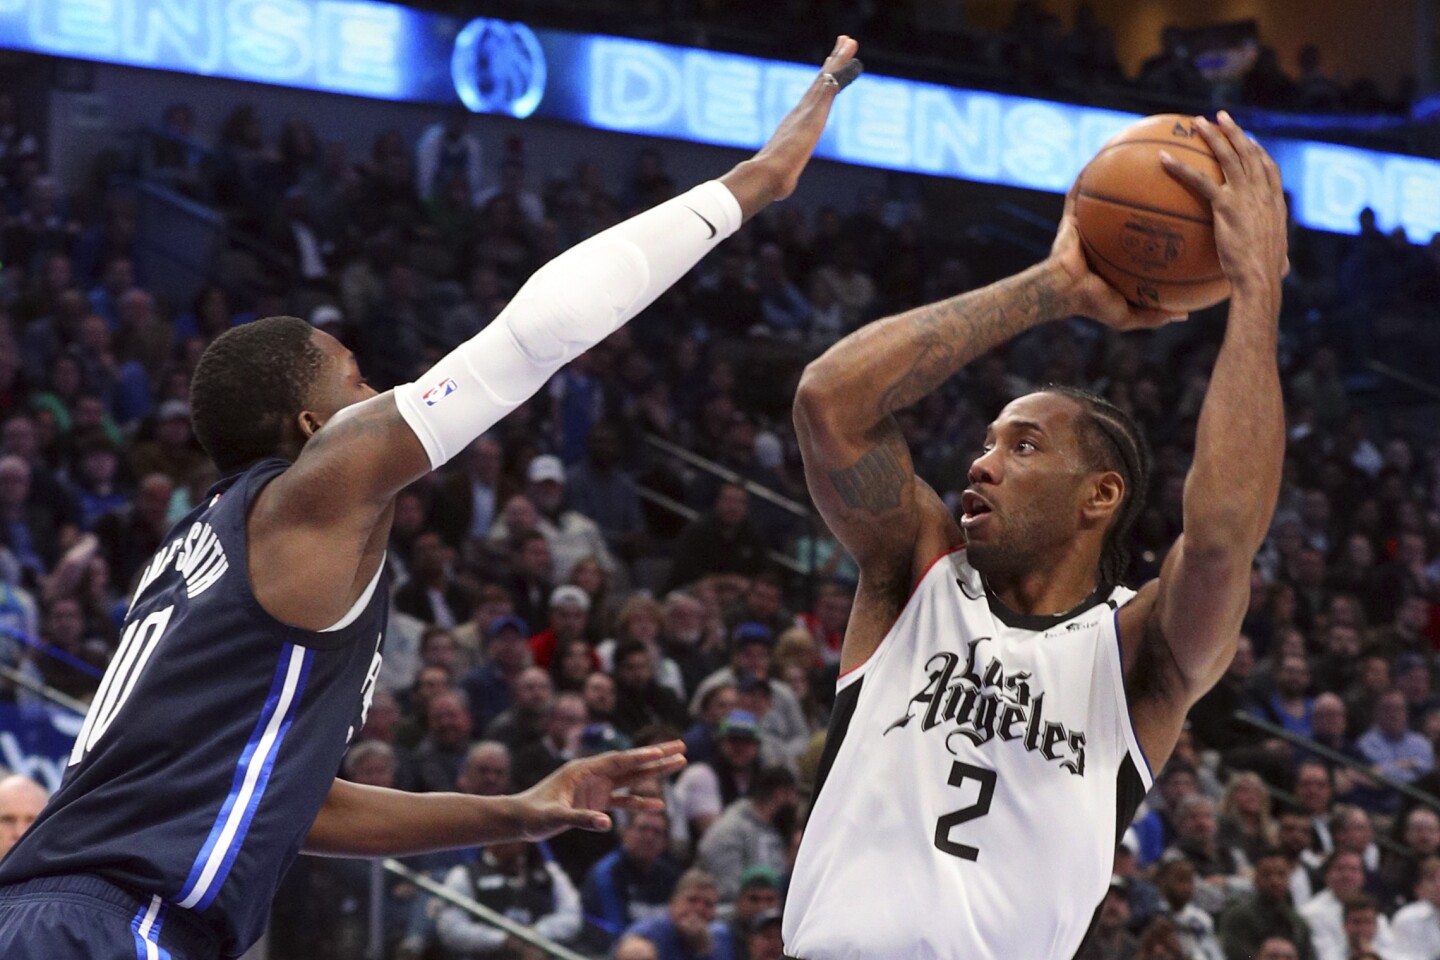 Dallas Mavericks forward Dorian Finney-Smith (10) tries to defend against a shot by Los Angeles Clippers forward Kawhi Leonard (2) during the second half of an NBA basketball game Tuesday, Jan. 21, 2020 in Dallas. (AP Photo/Richard W. Rodriguez)